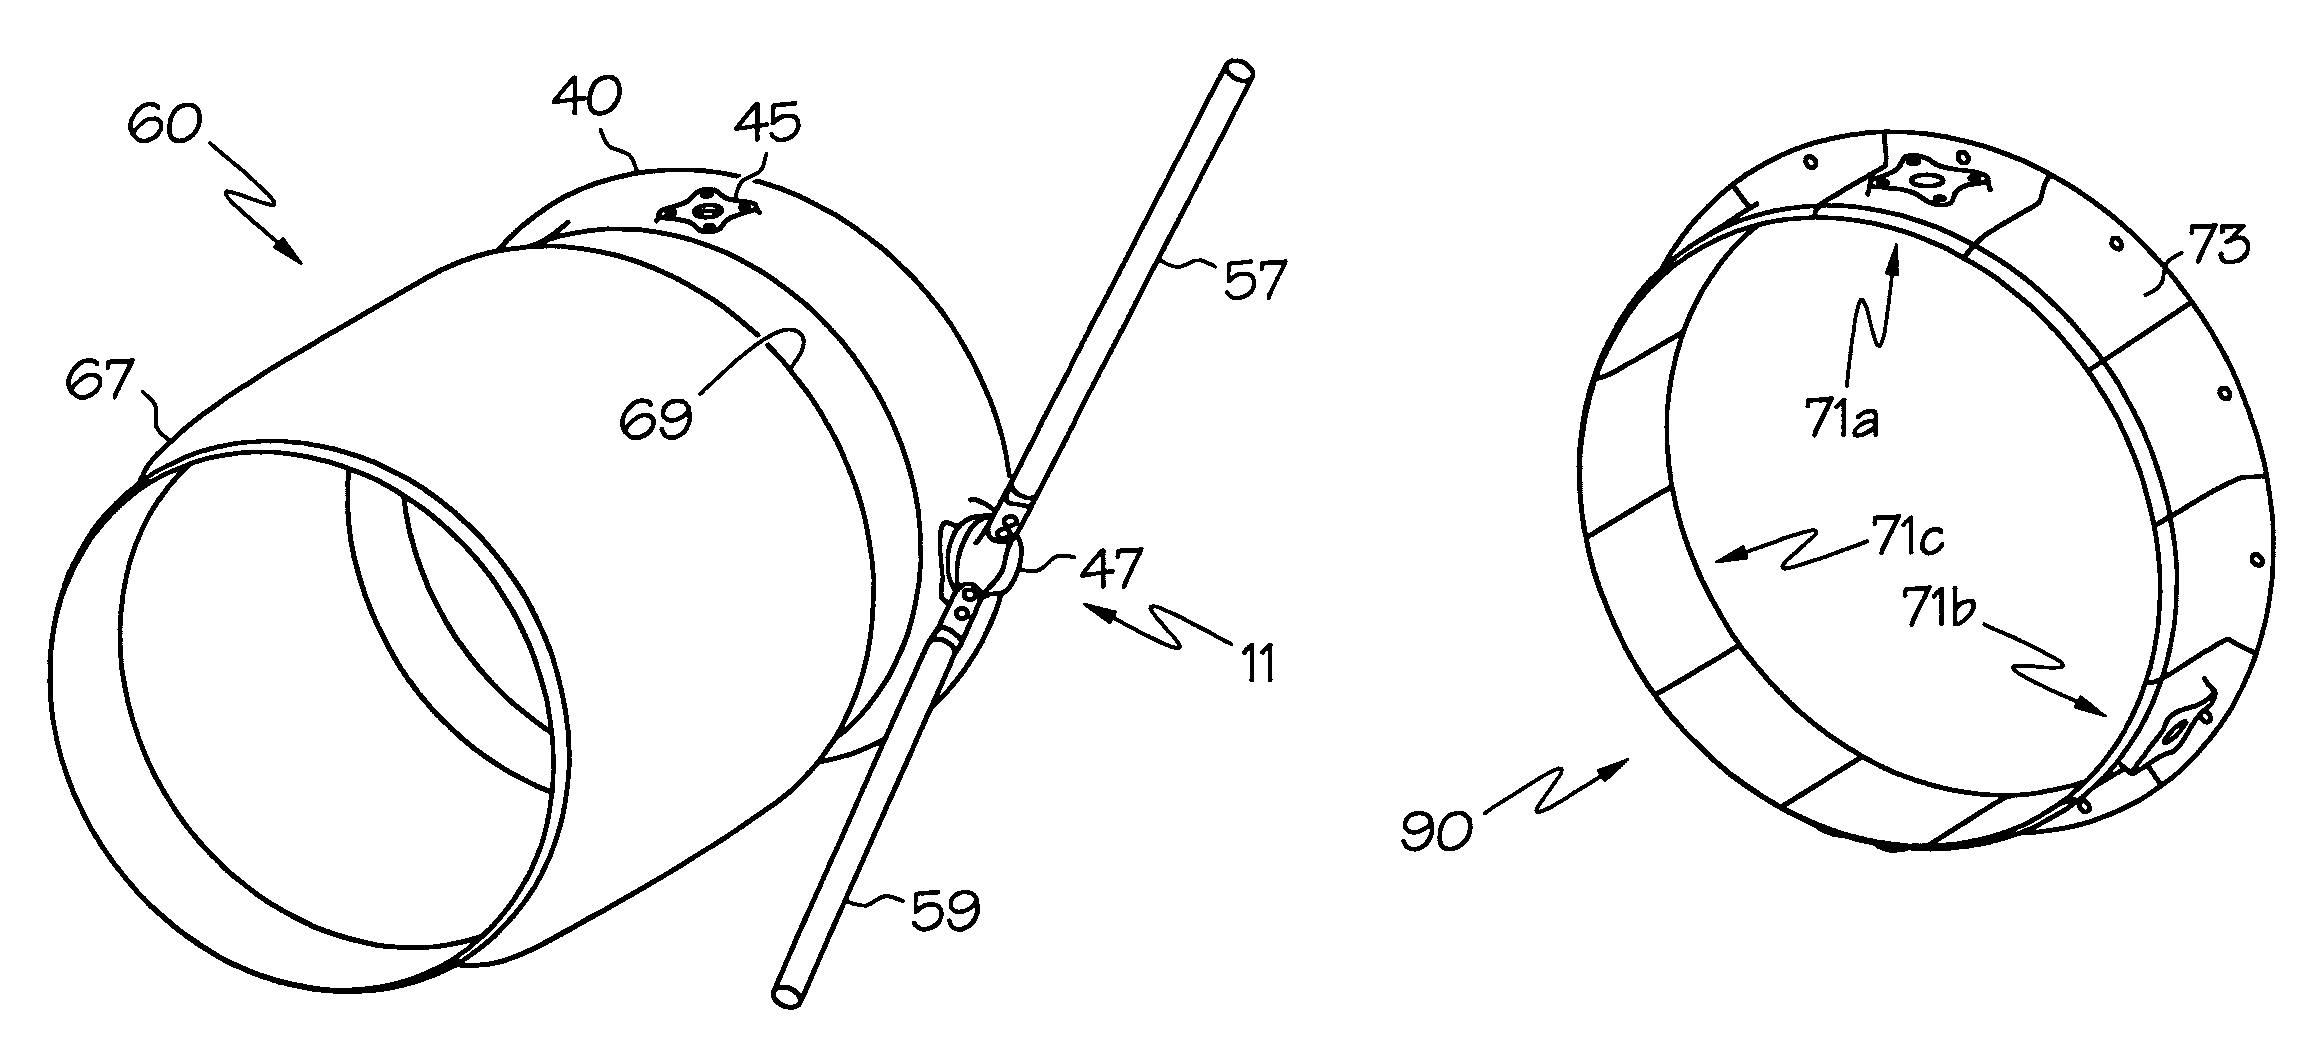 Integrated mount duct for use with airborne auxiliary power units and other turbomachines